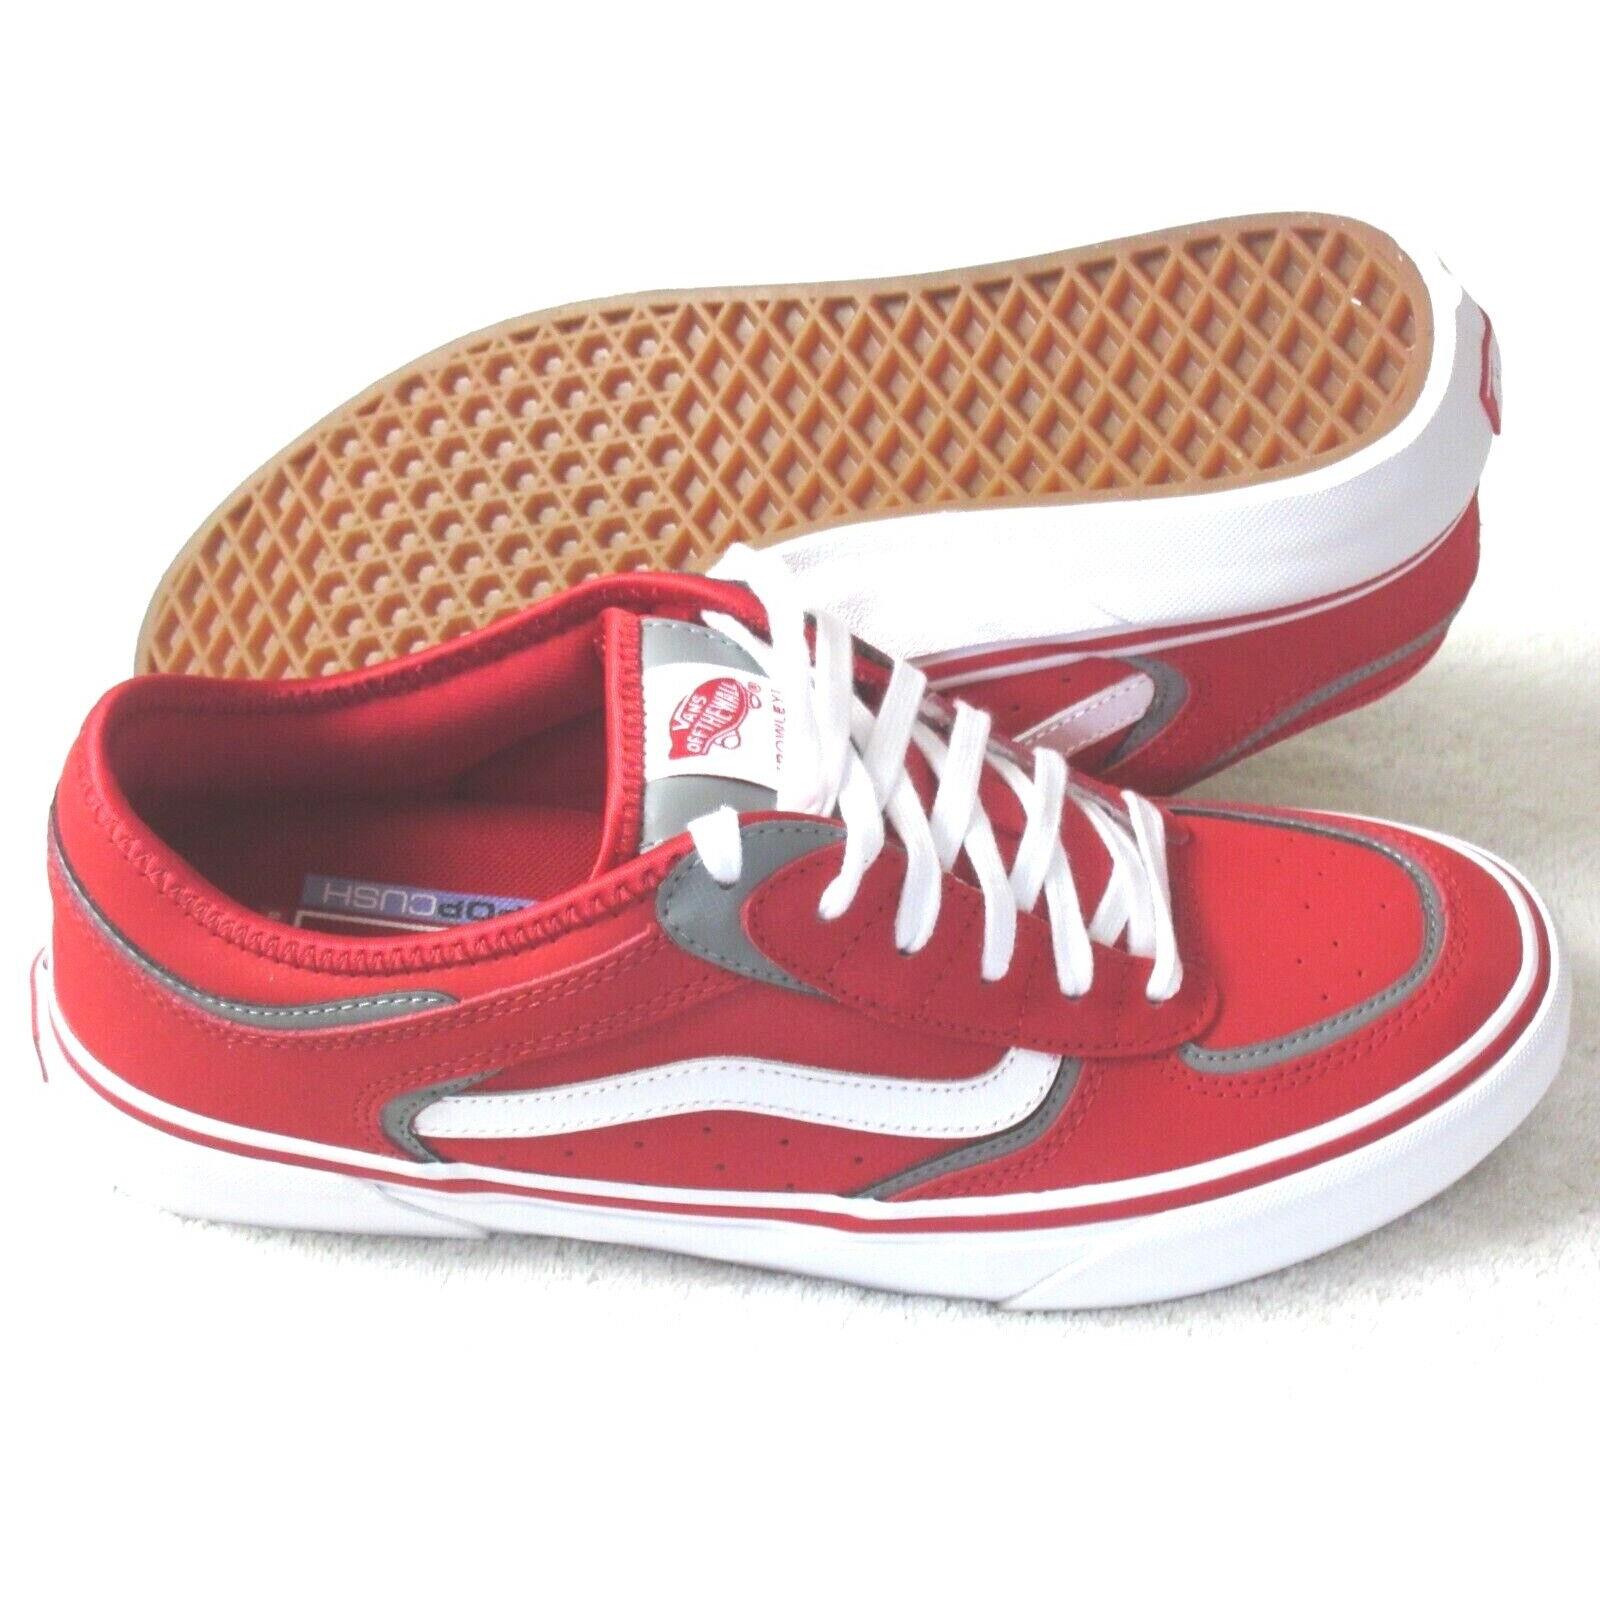 Vans Men`s Rowley Popcush Skate Shoes Racing Red White Size 8.5